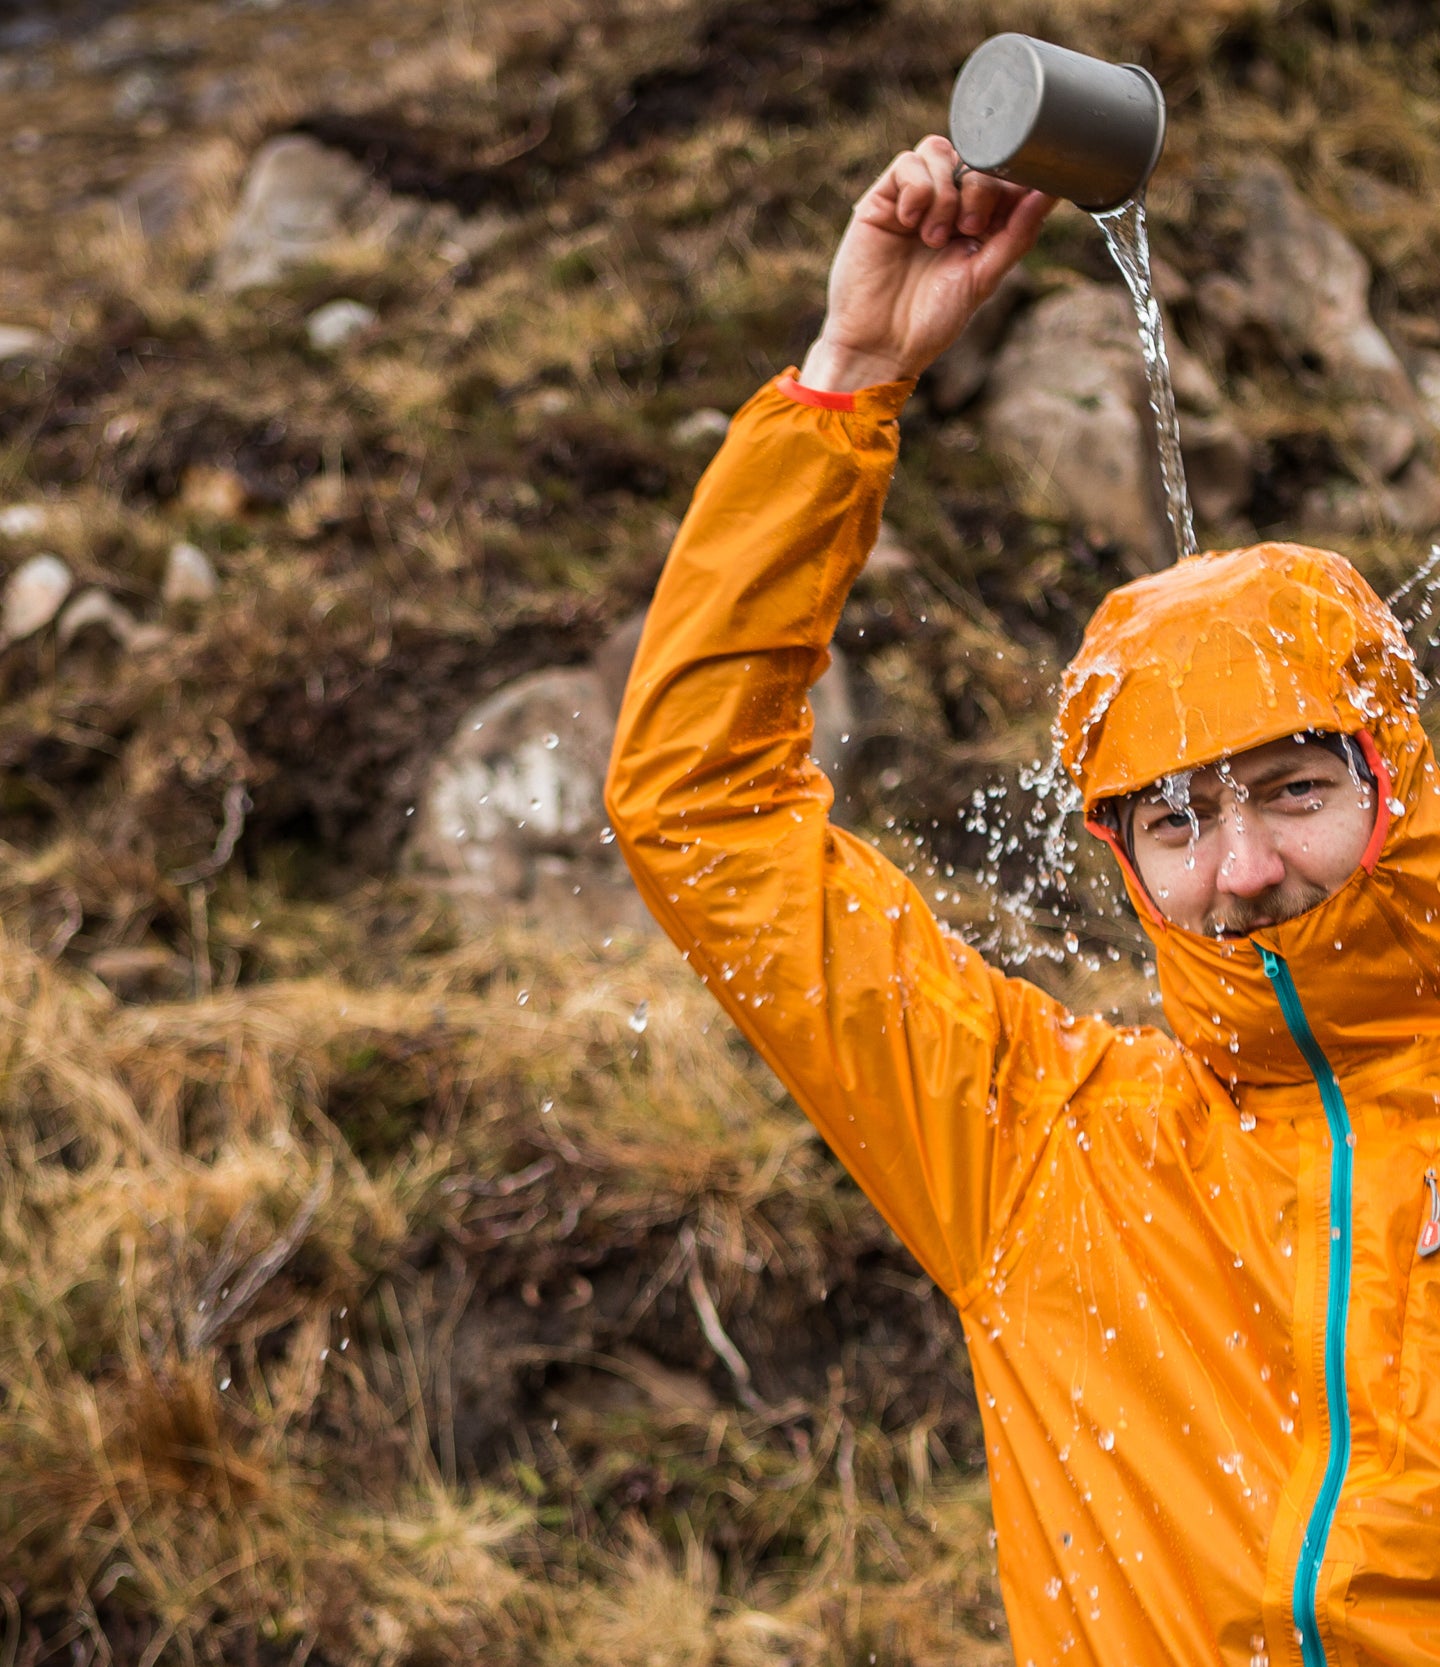 How to Waterproof a Jacket